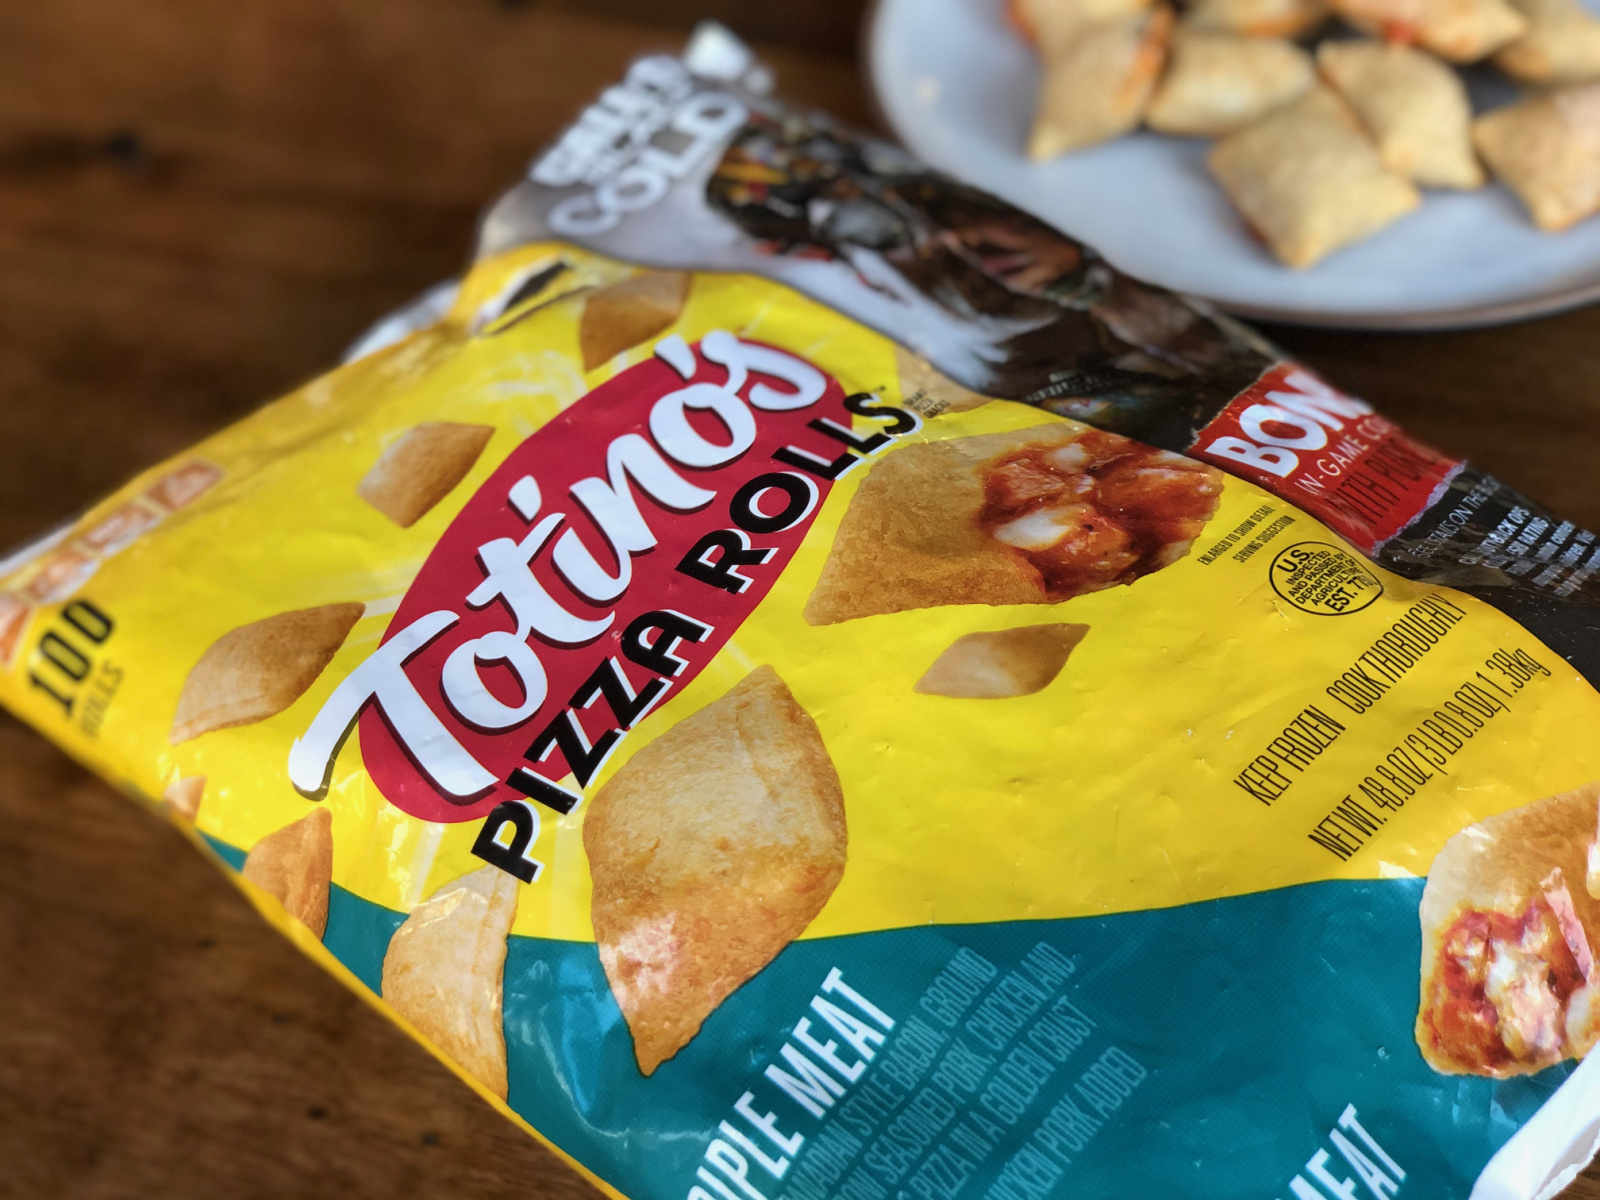 Big Bags Of Totino’s Pizza Rolls As Low As $5.93 At Publix (Regular Price $13.85)